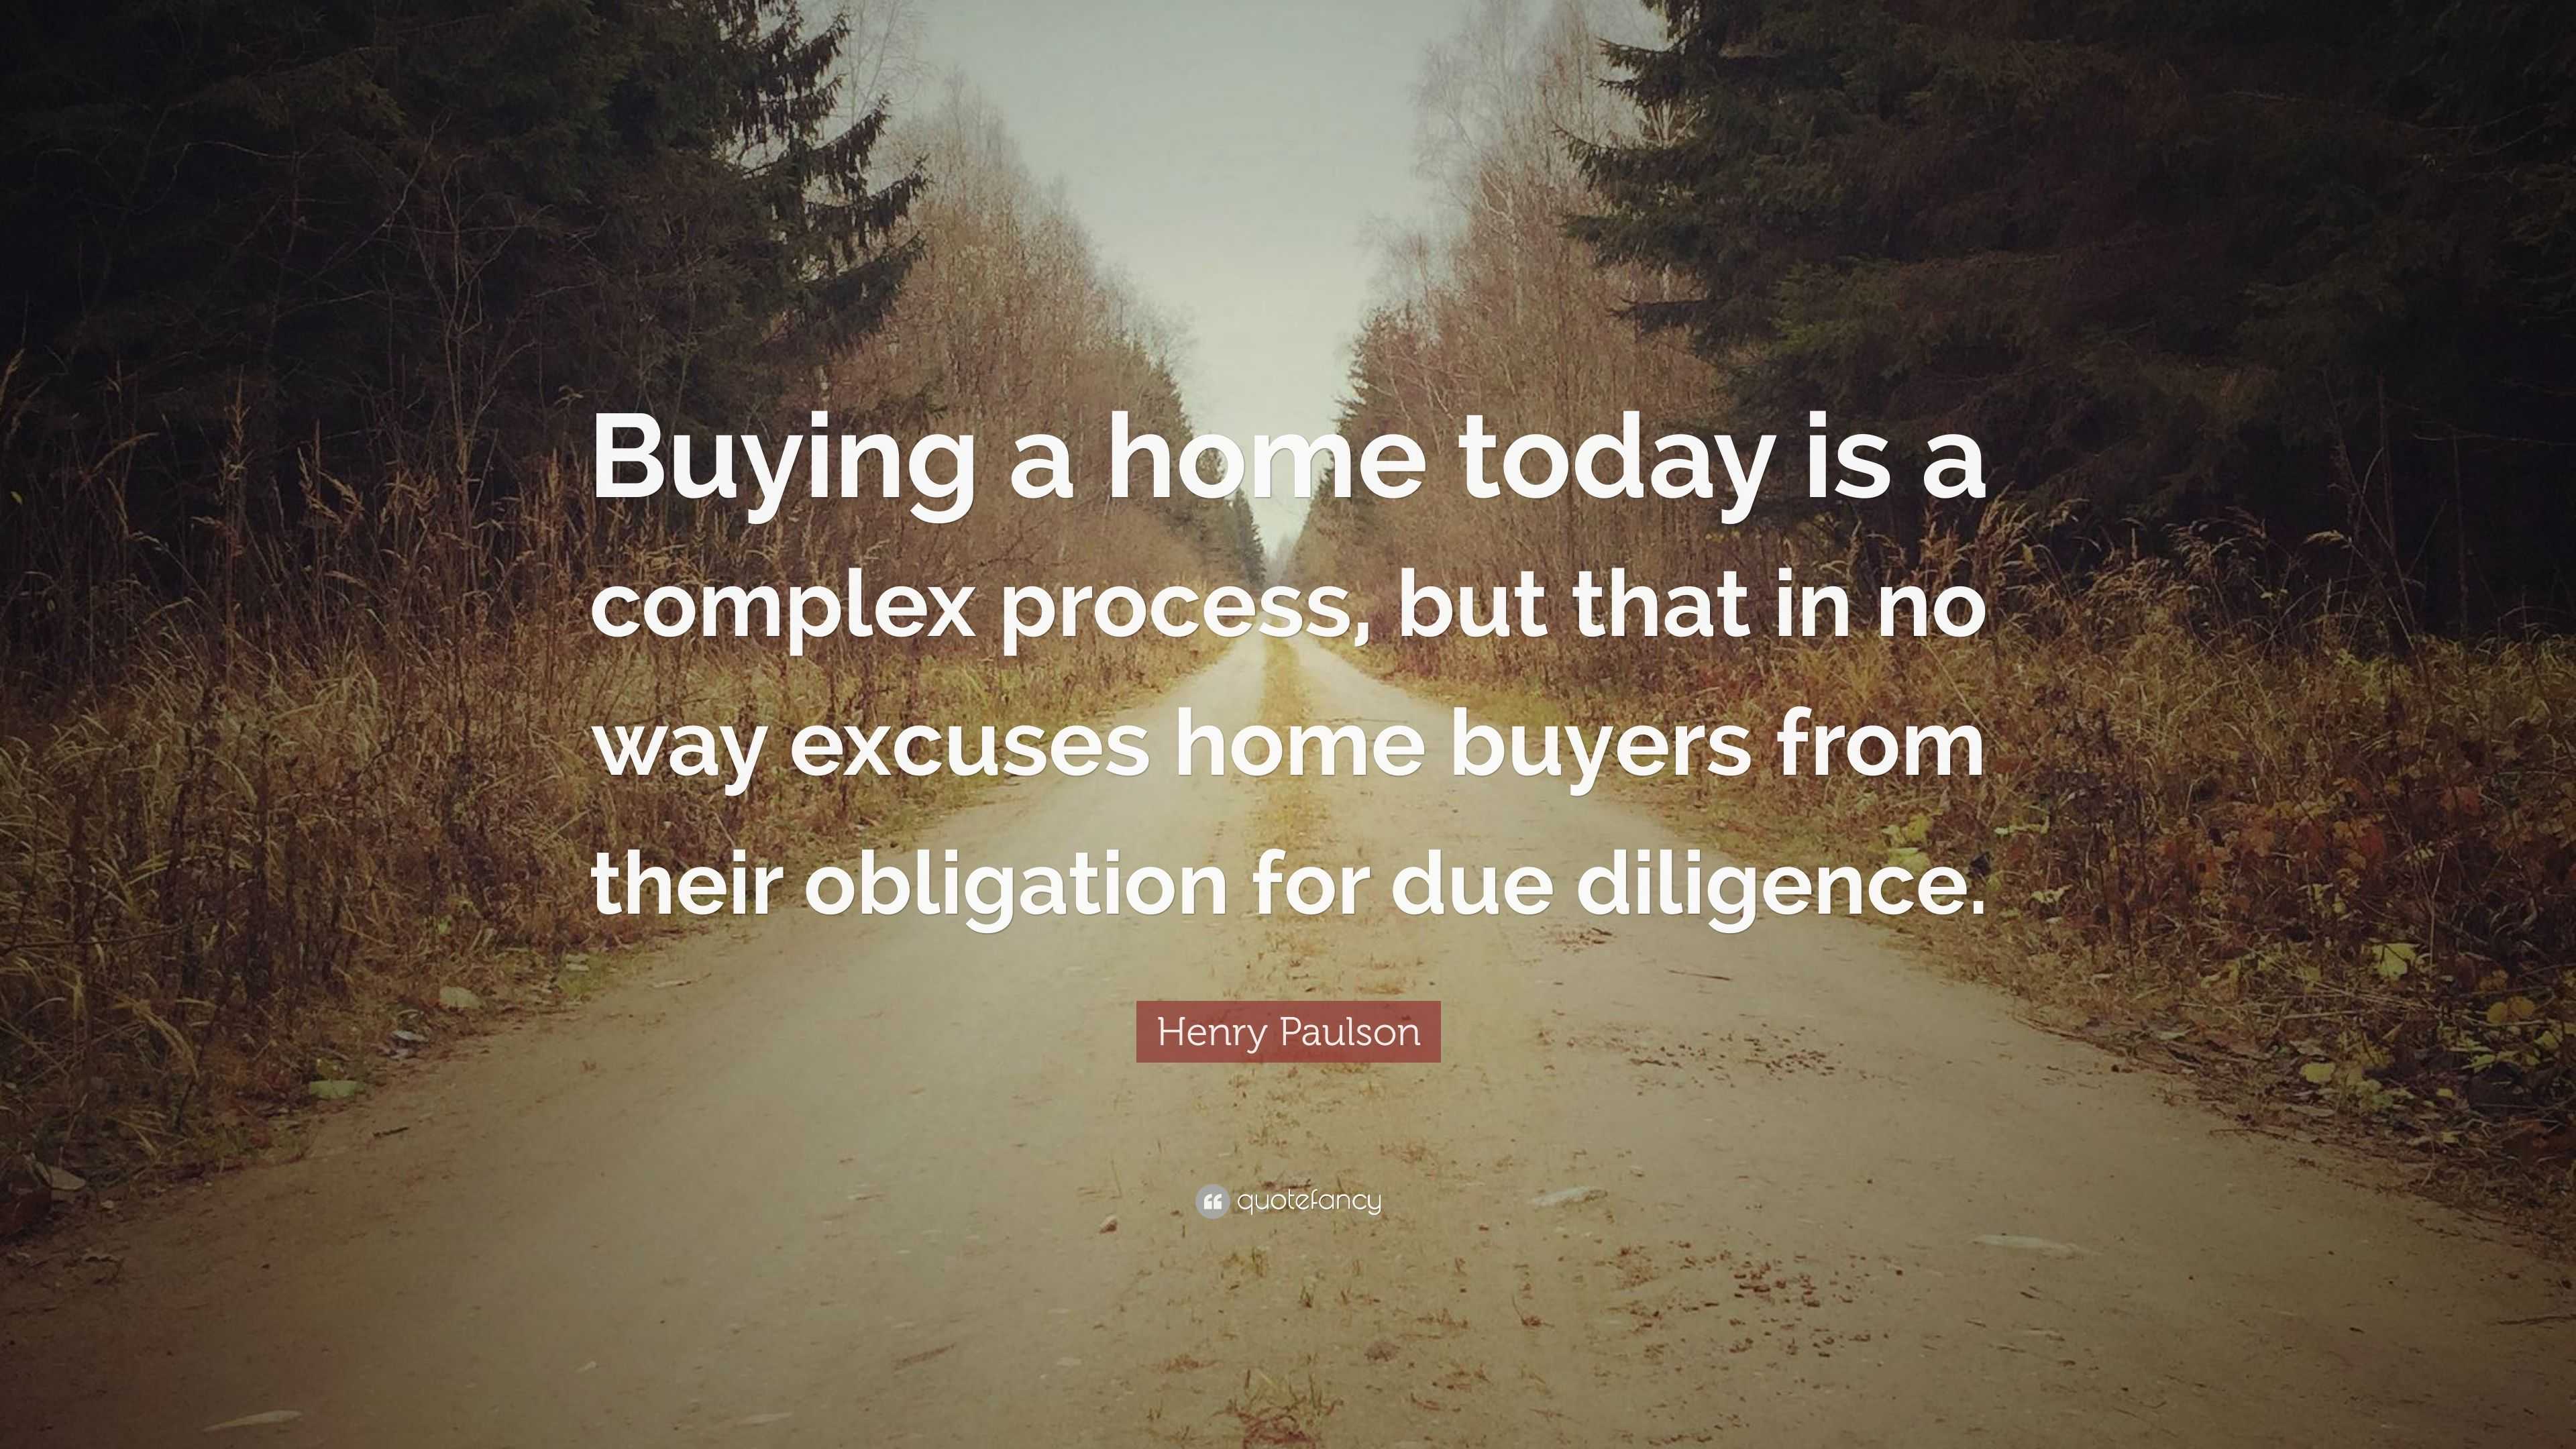 Henry Paulson Quote: “Buying a home today is a complex process, but